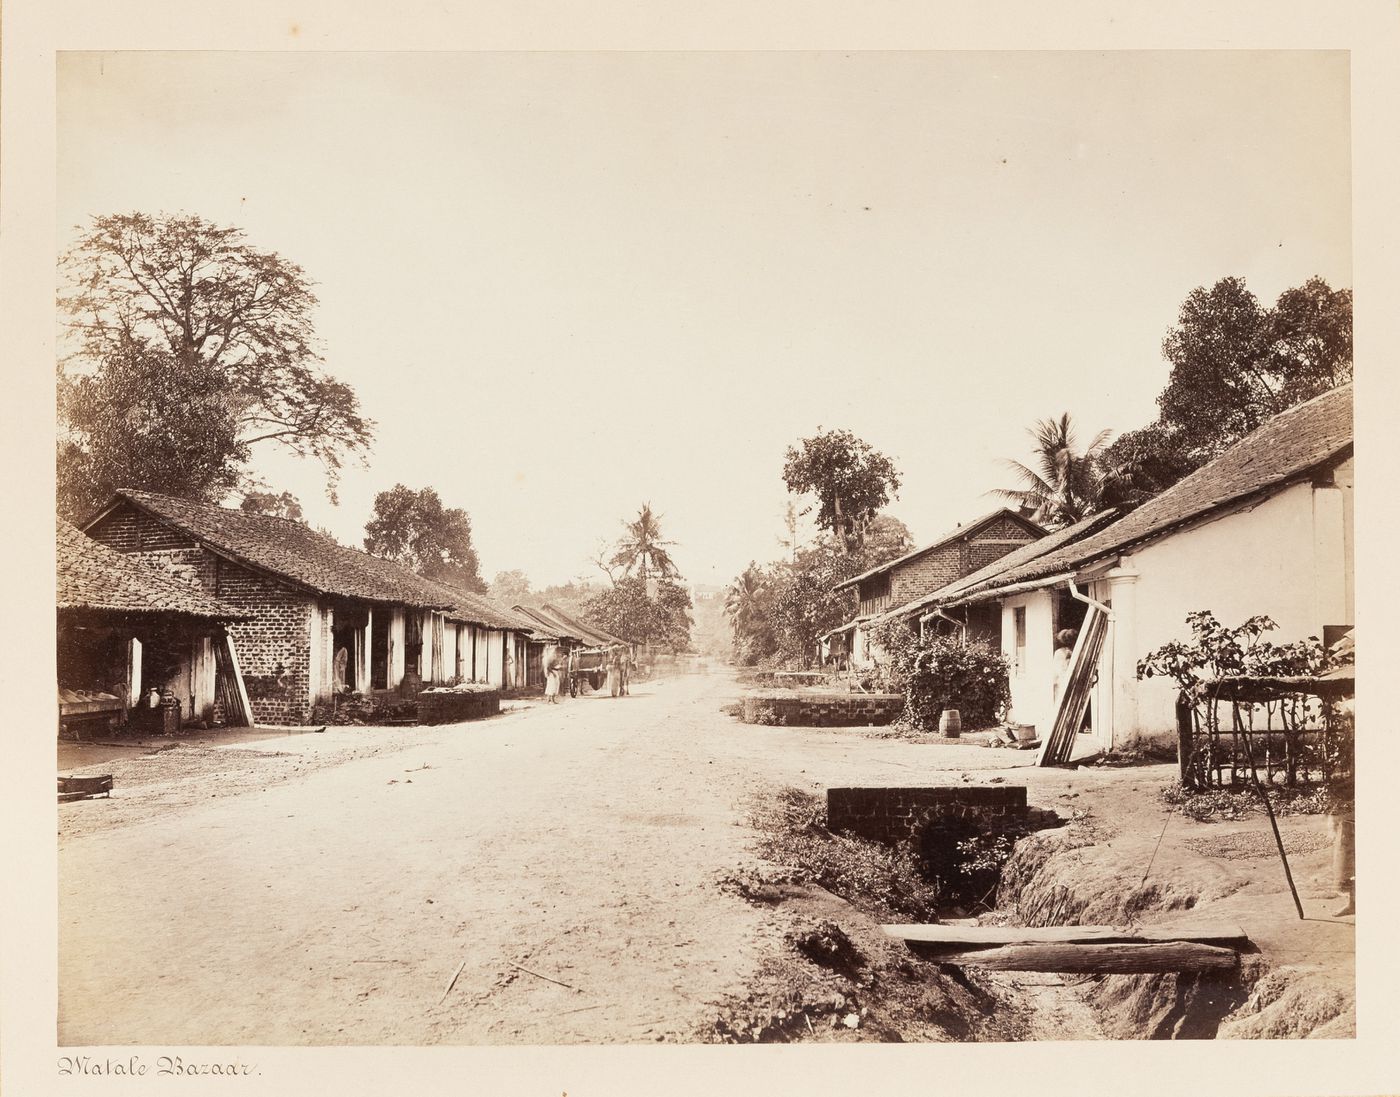 View of a road and houses, Matale Bazaar, Matale, Ceylon (now Sri Lanka)